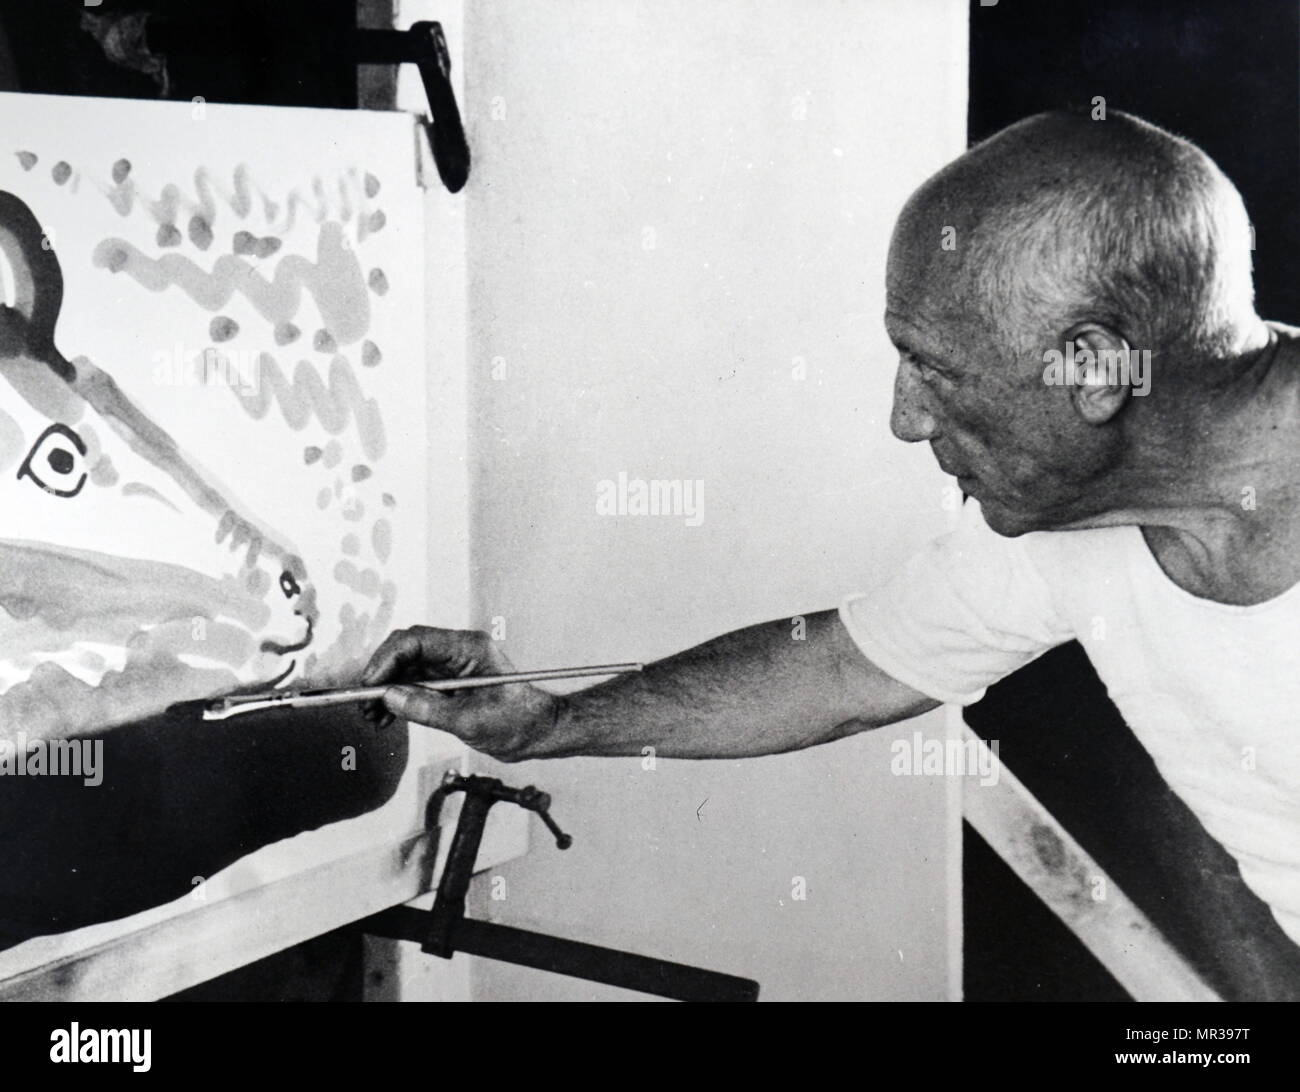 Photograph of Pablo Picasso (1881-1973) a Spanish painter, sculptor, printmaker, ceramicist, stage designer, poet, and playwright. Dated 20th century Stock Photo